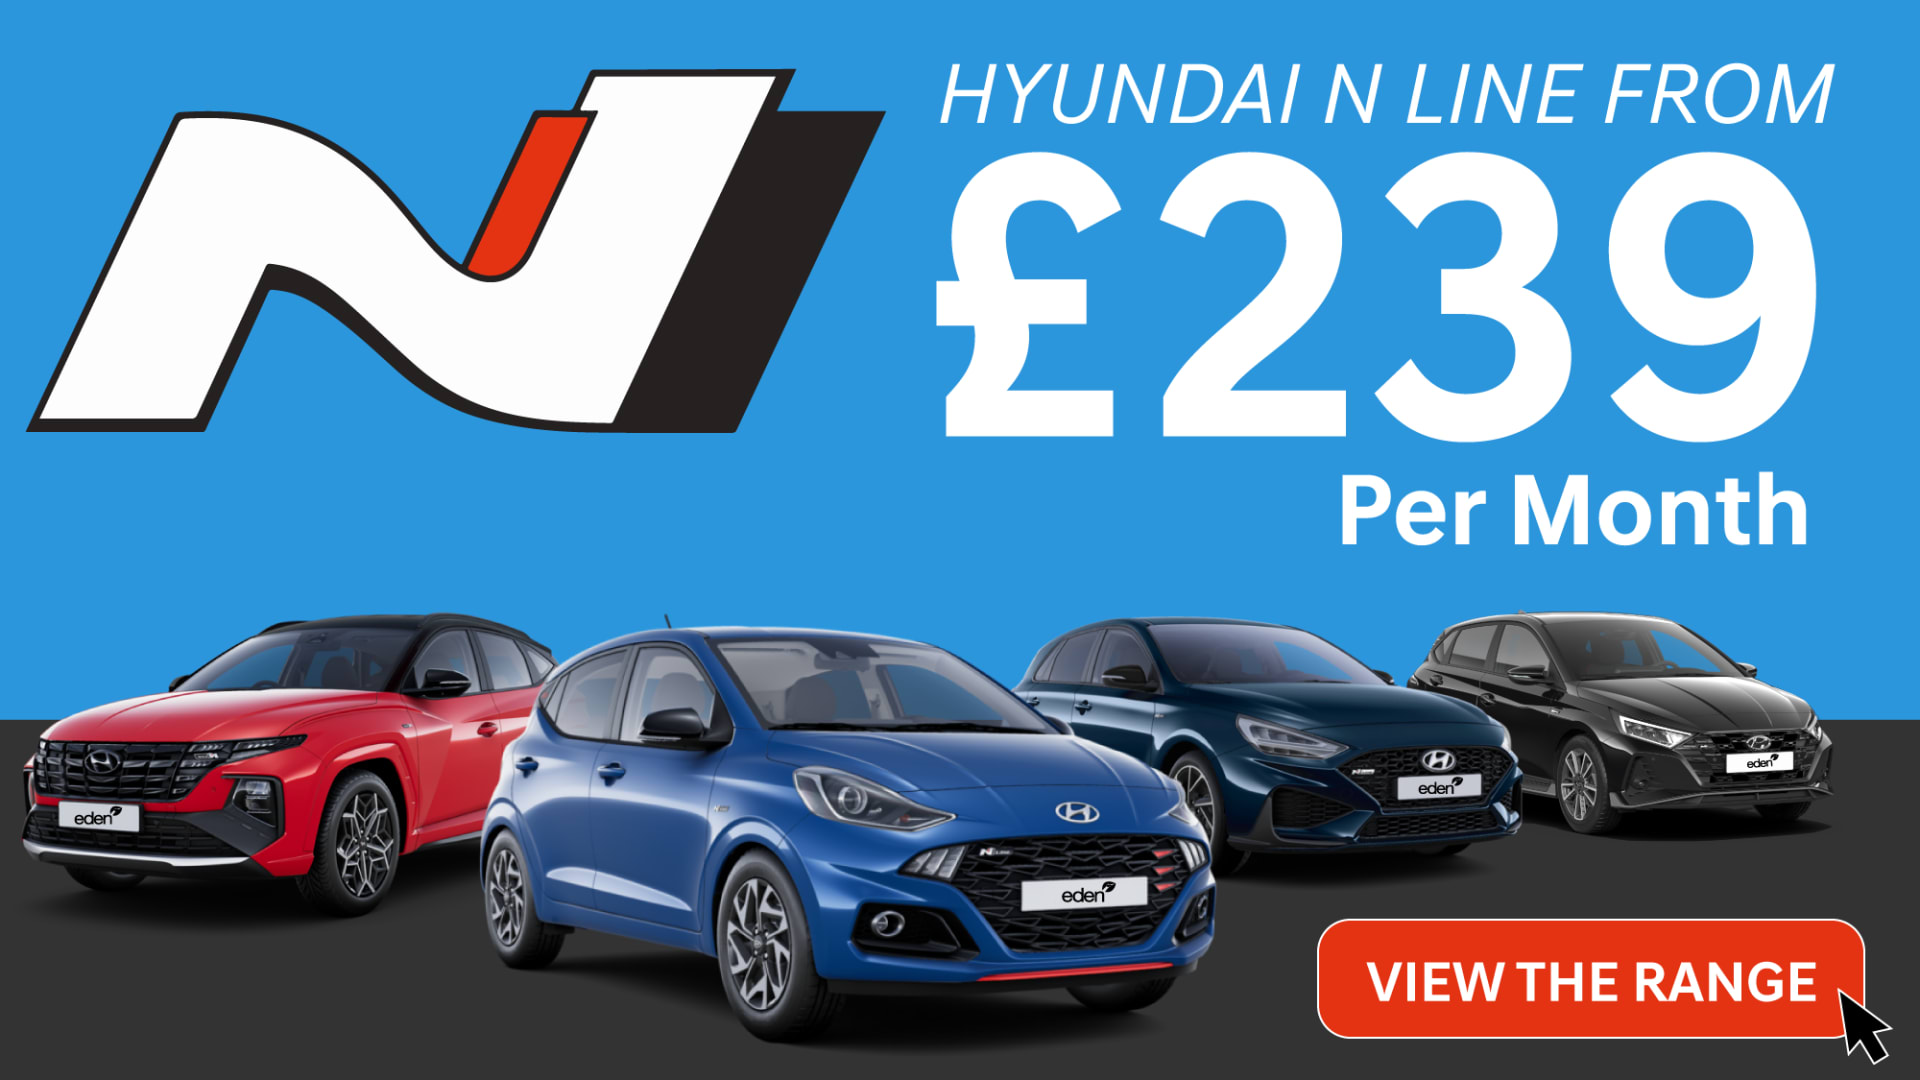 Hyundai N Line Offers Available NOW!